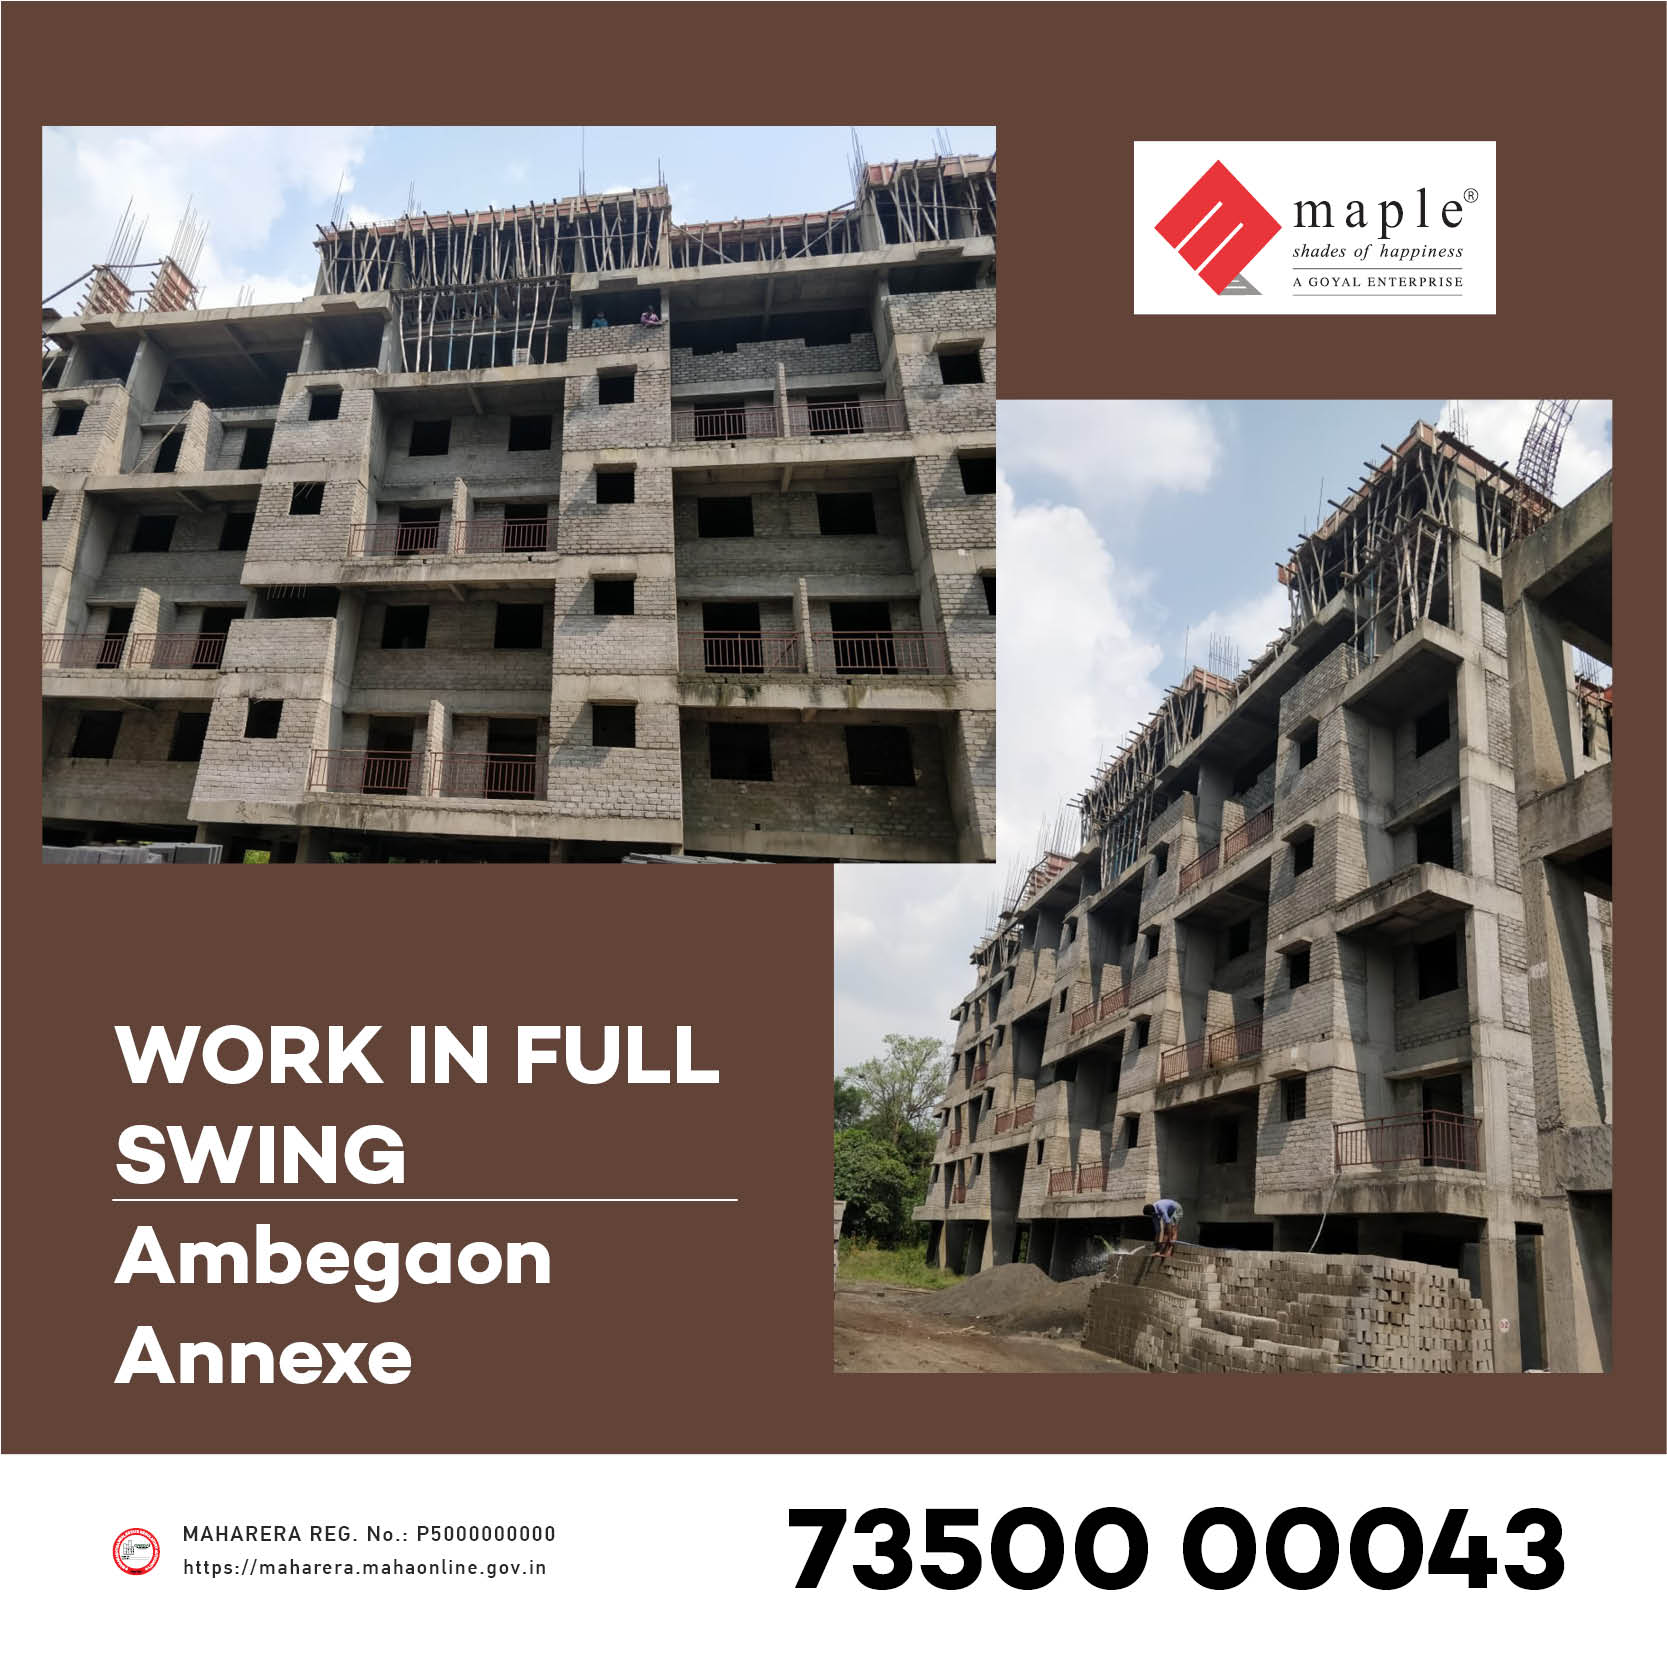  Aapla Ghar AMBEGAON  | Maple Group | 1BHK NEAR TO POSSESSION IN AMBEGAON, CONSTRUCTION IN FULL SWING IN AMBEGAON, TOP 10 PROJECTS IN AMBEGAON, REAL ESTATE PROJECTS BY TOP BUILDERS IN PUNE, 2BHK APARTMENTS FOR SALE IN AMBEGAON. - GL27635